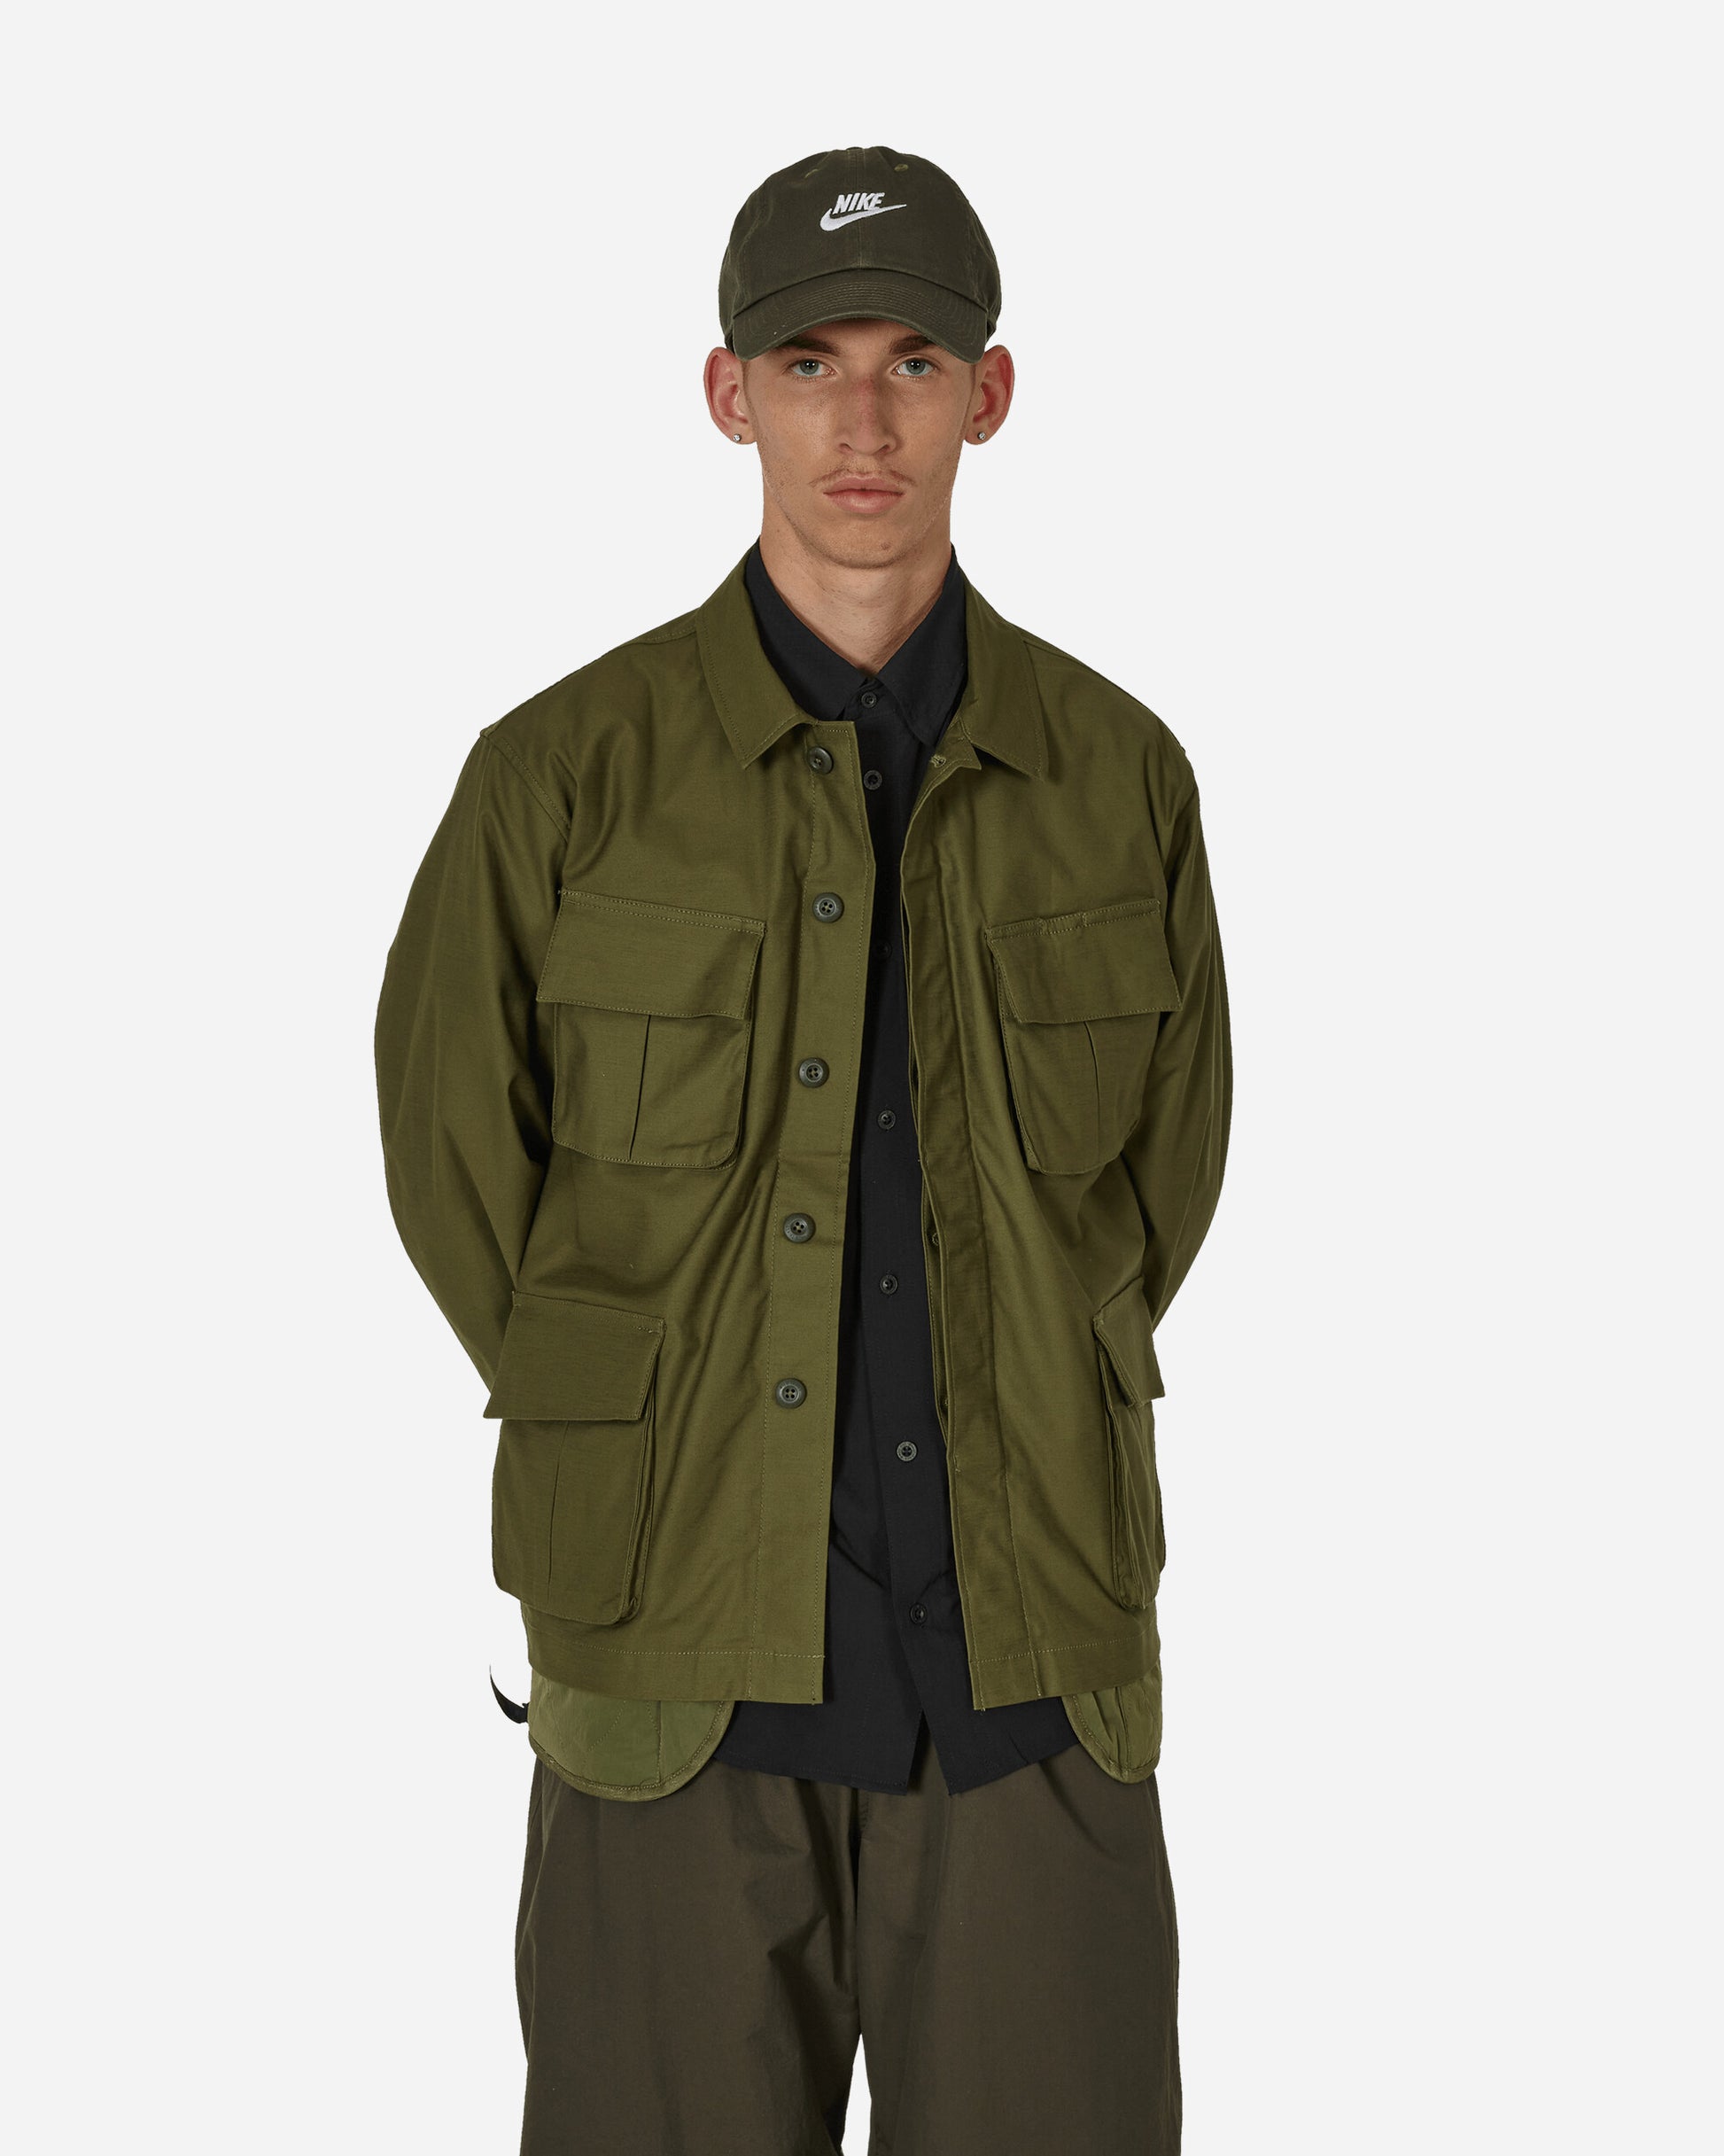 Wild Things Bdu+Quilting Attachable Jkt Olive Drab Coats and Jackets Jackets WT232-09 OD